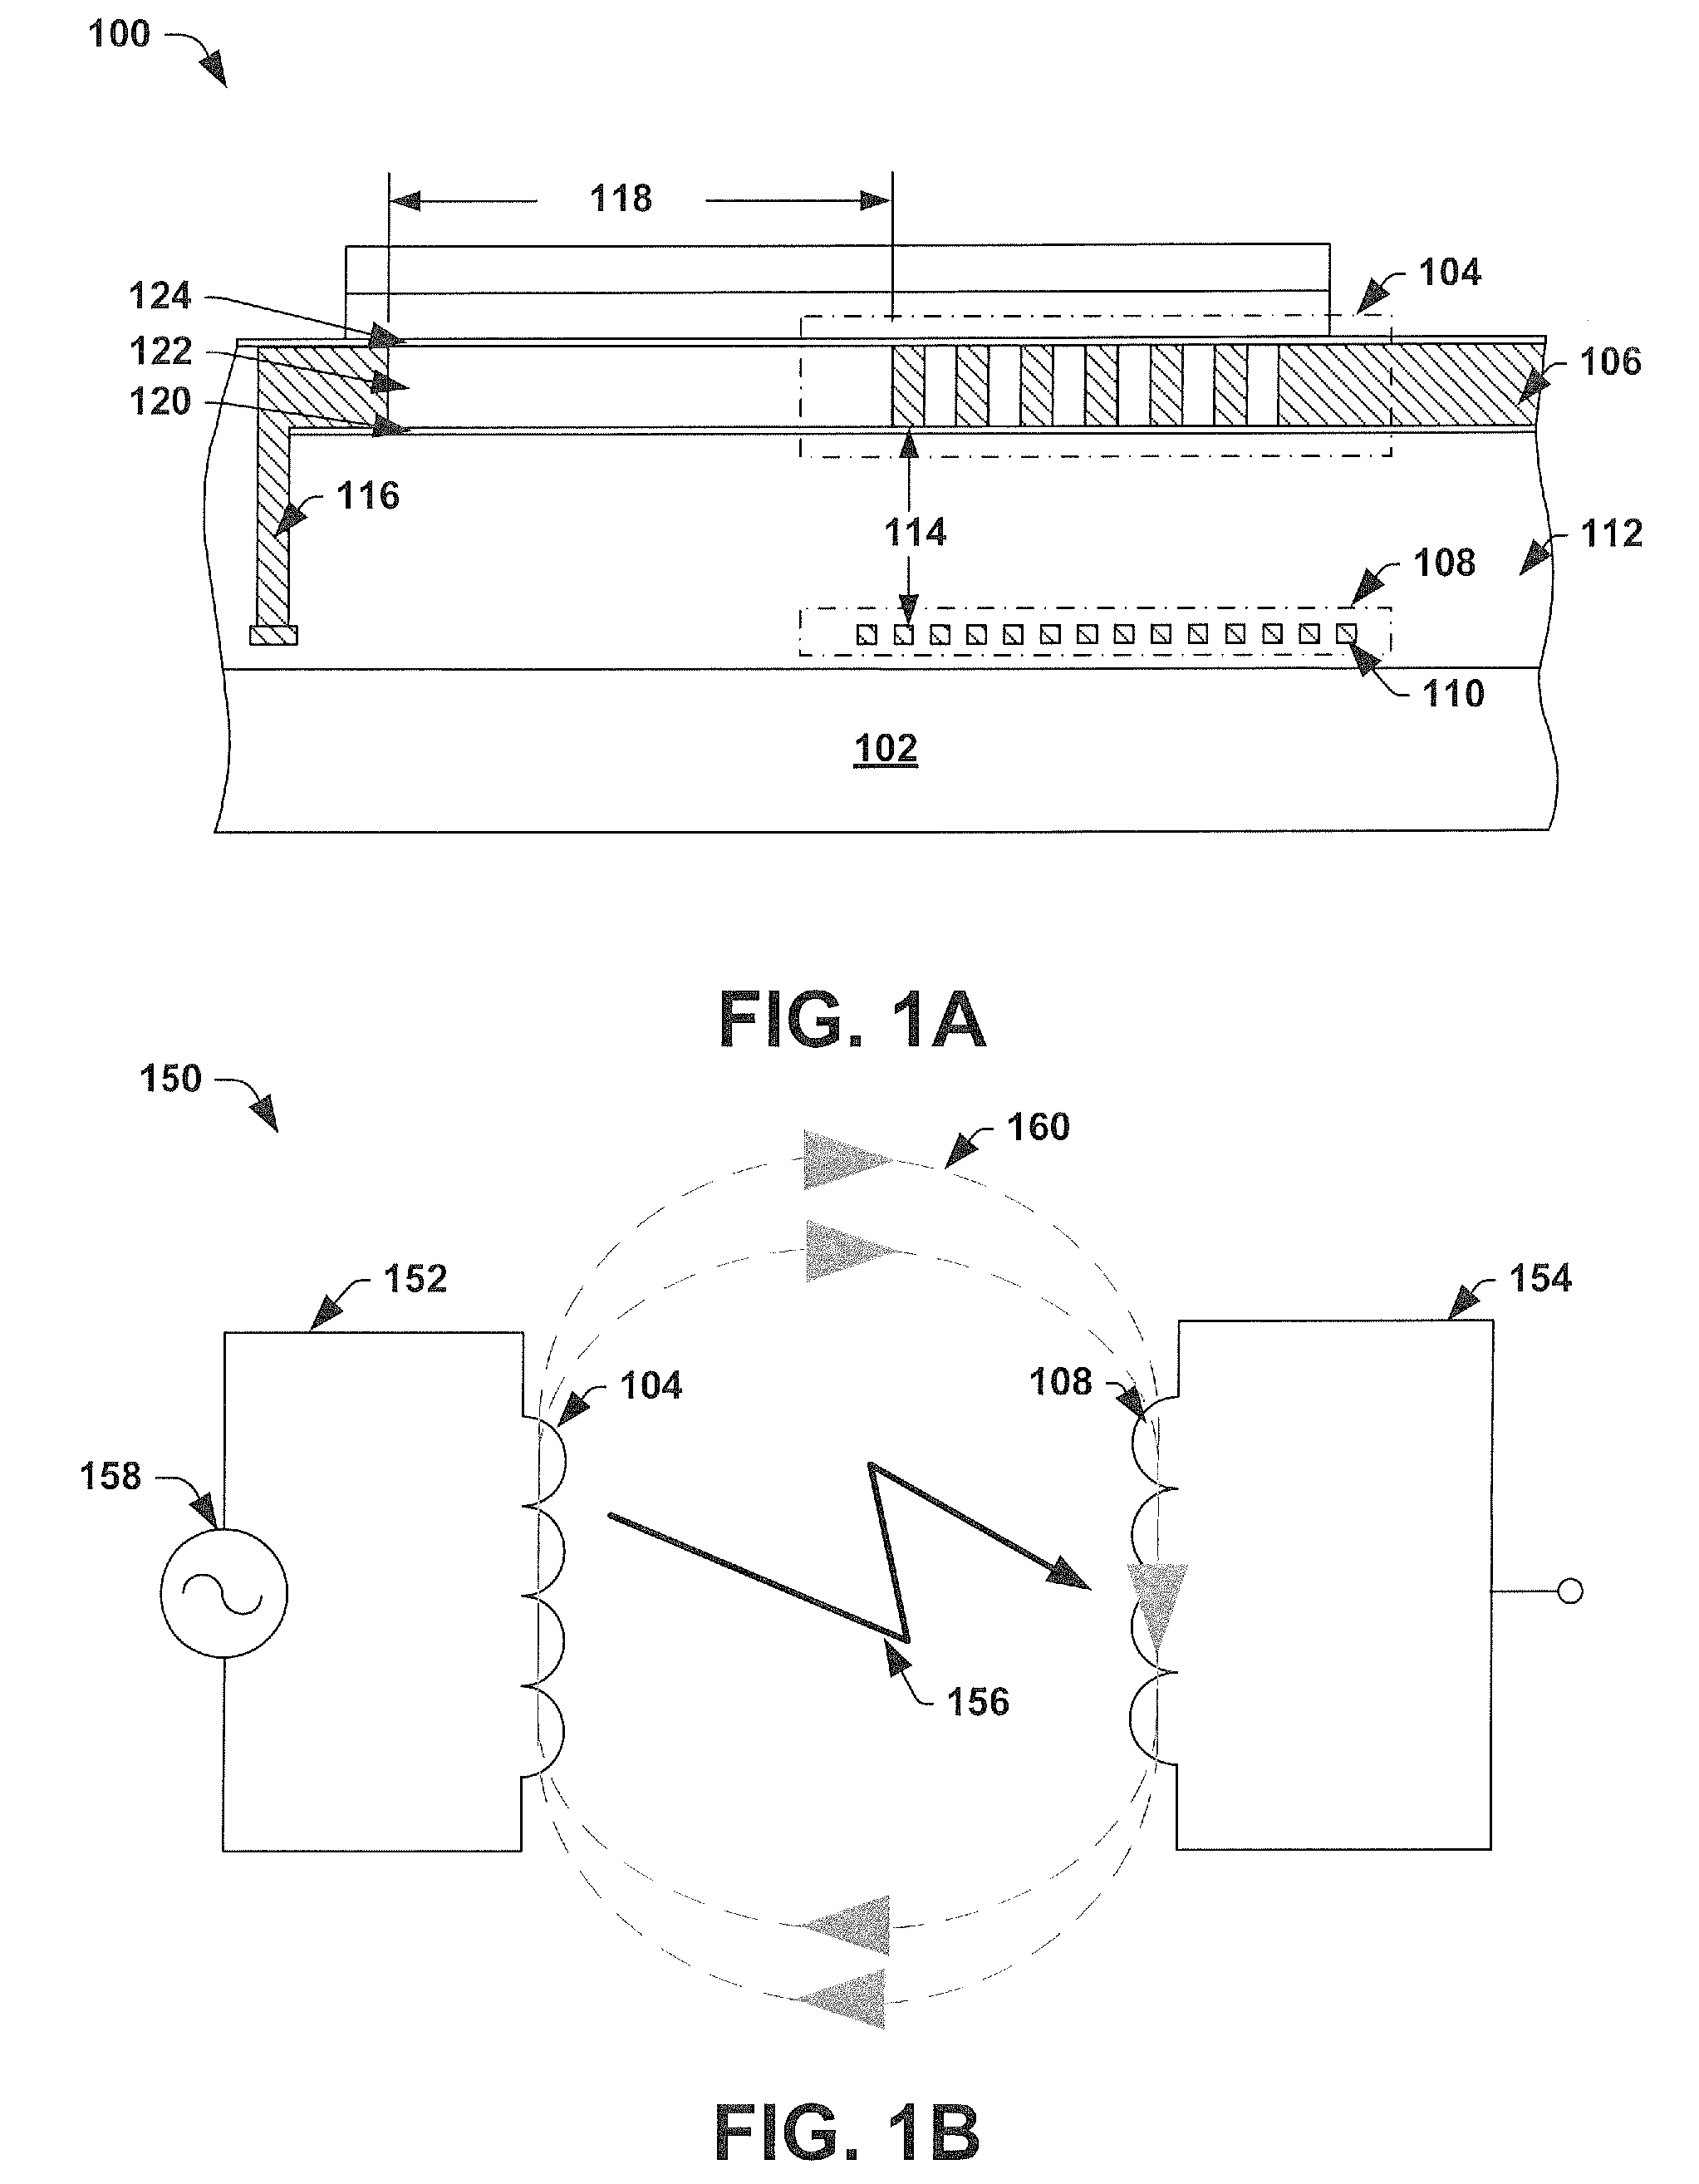 High voltage resistance coupling structure